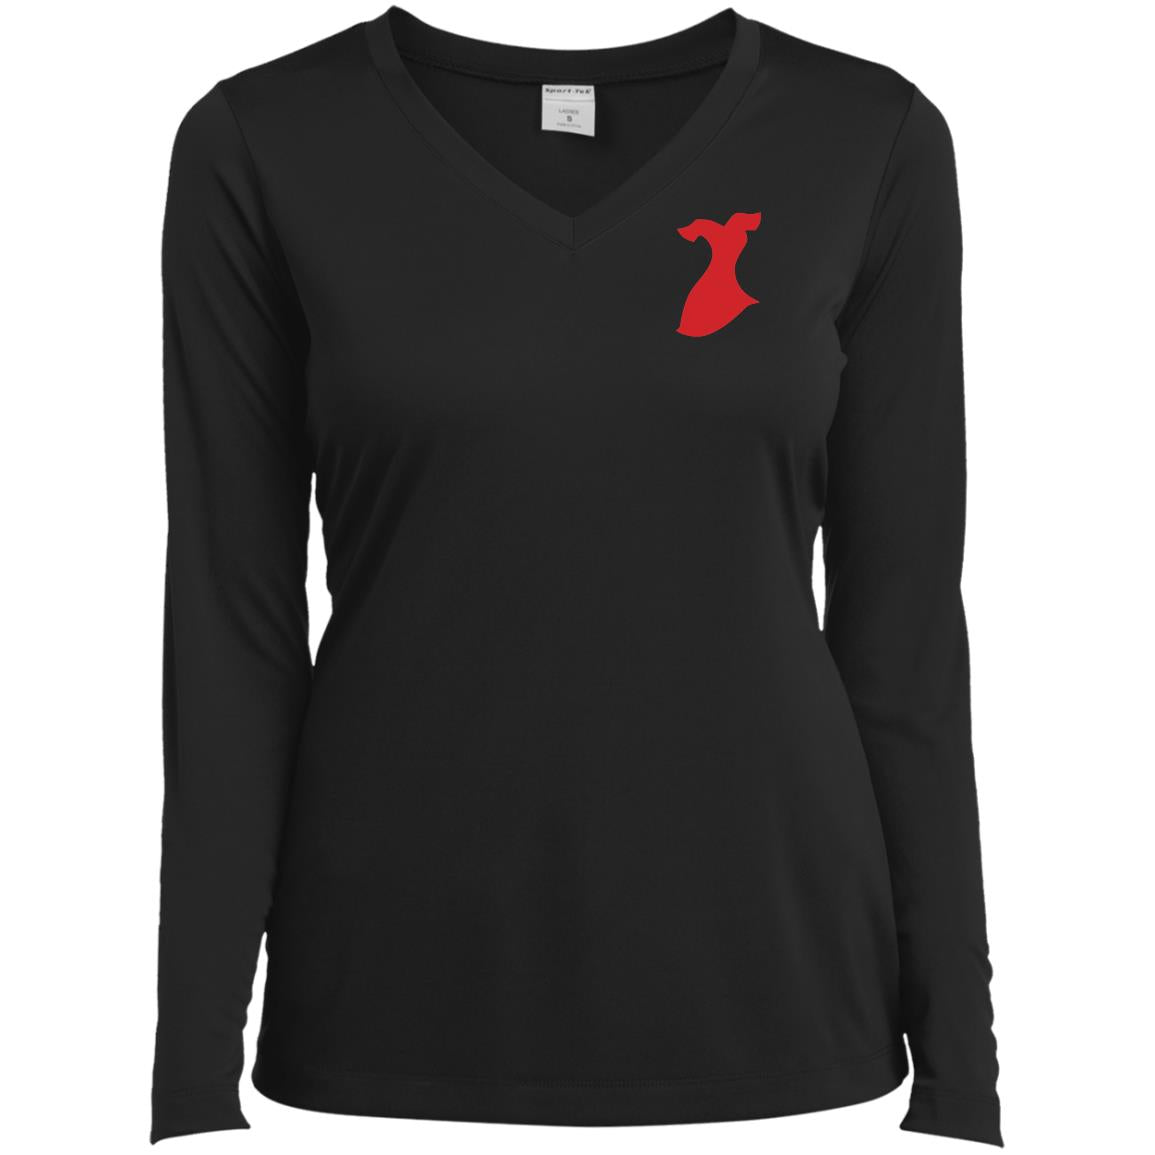 Go Red Ladies’ Long Sleeve Performance V-Neck Tee